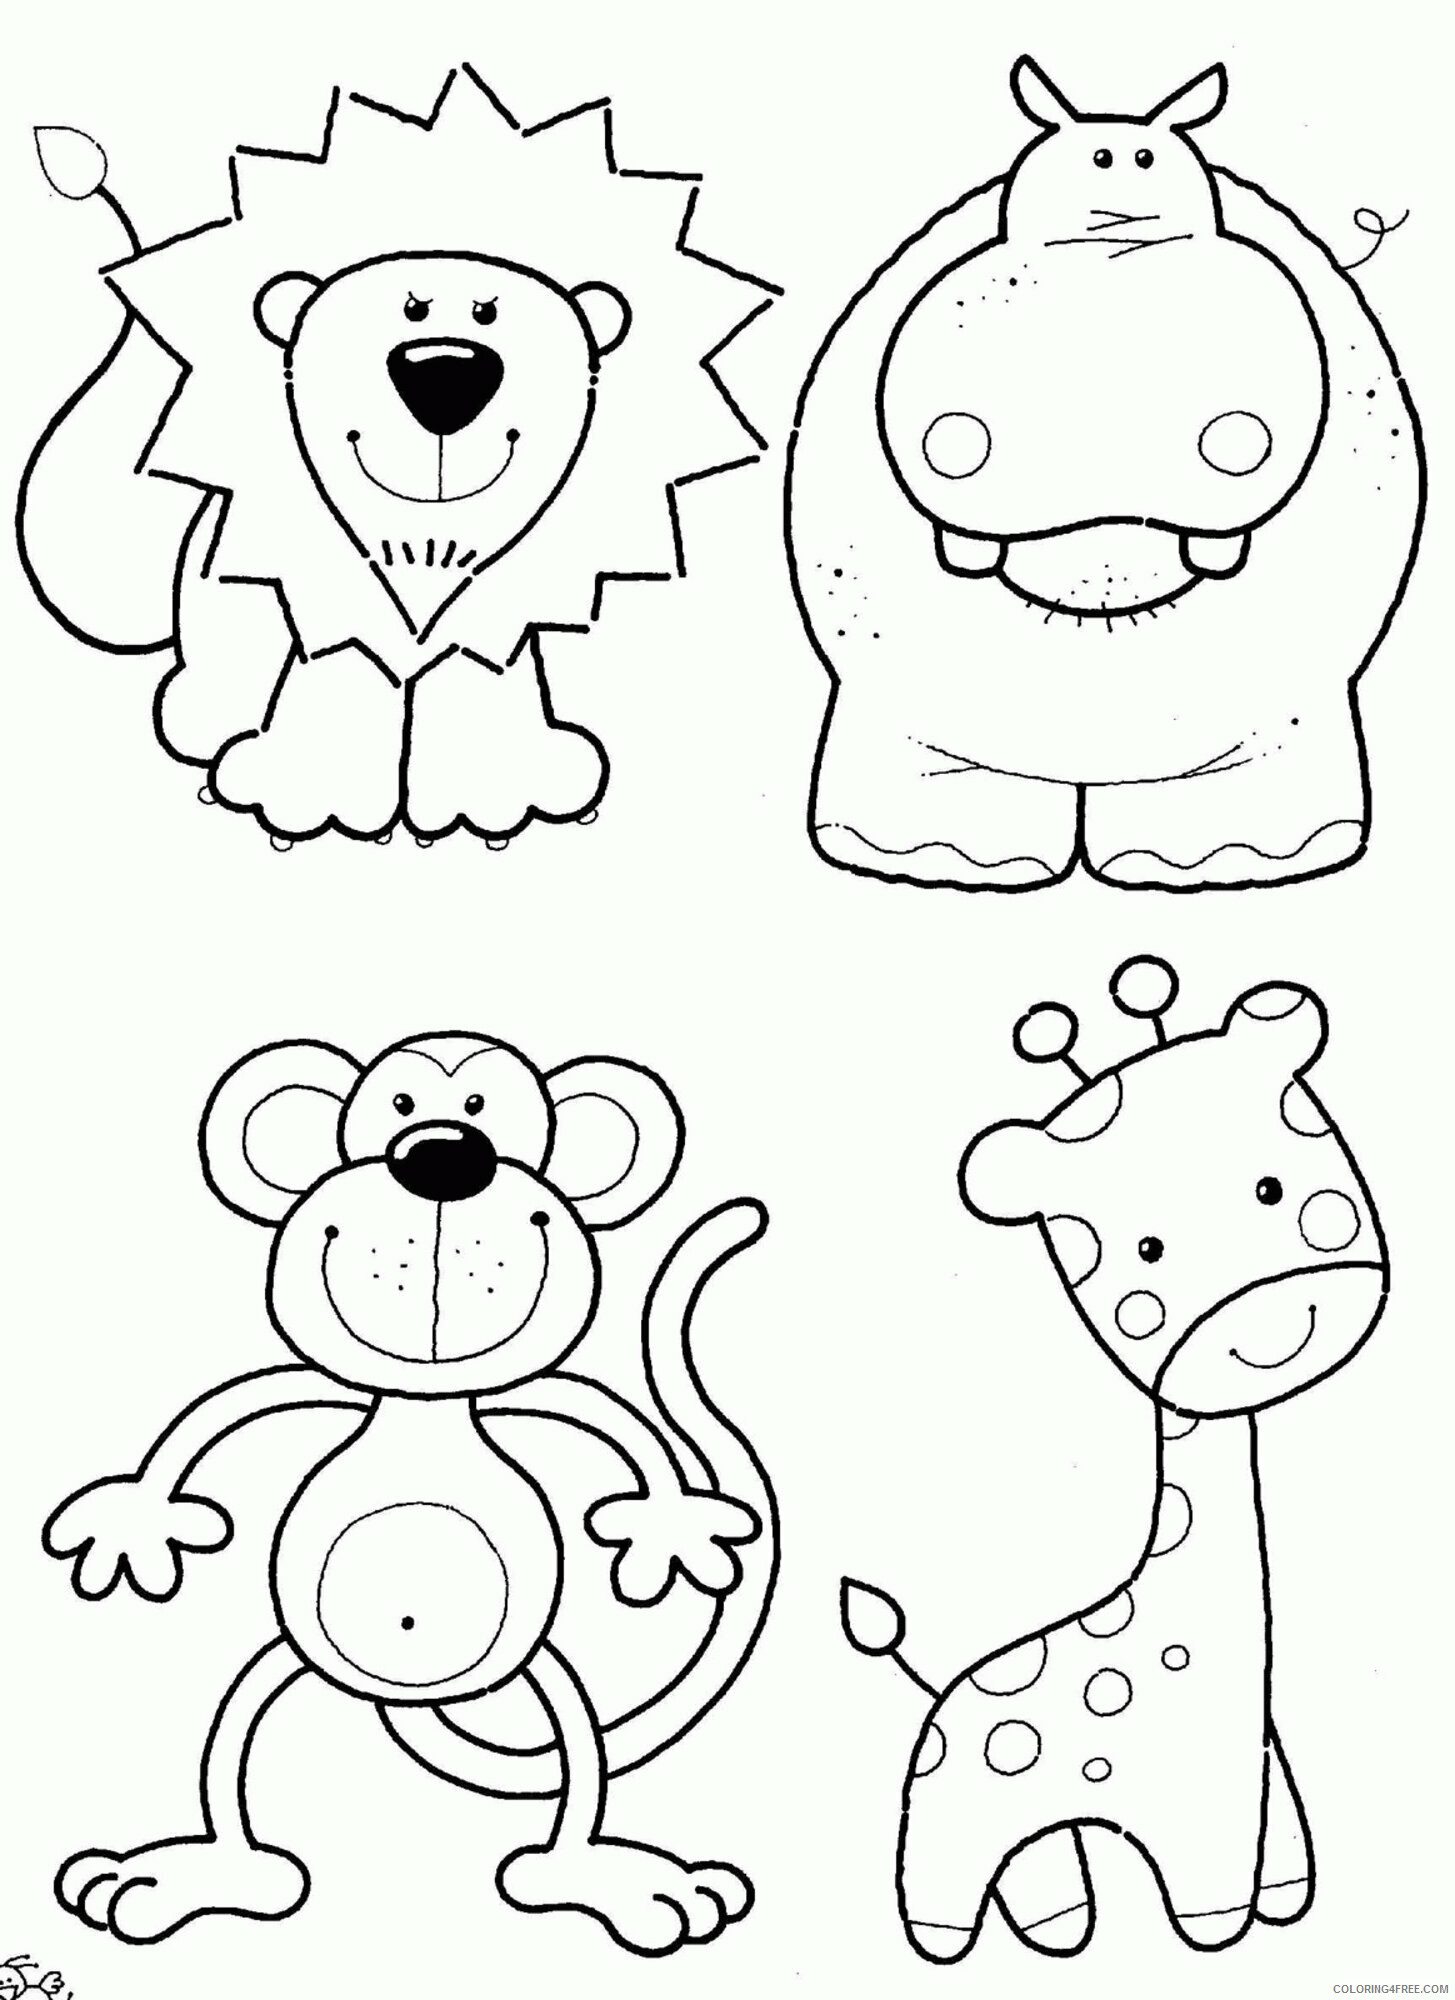 Animal Coloring Pages Printable Free Printable Sheets Animal Coloirng Zebra Zoo 2021 a 0449 Coloring4free